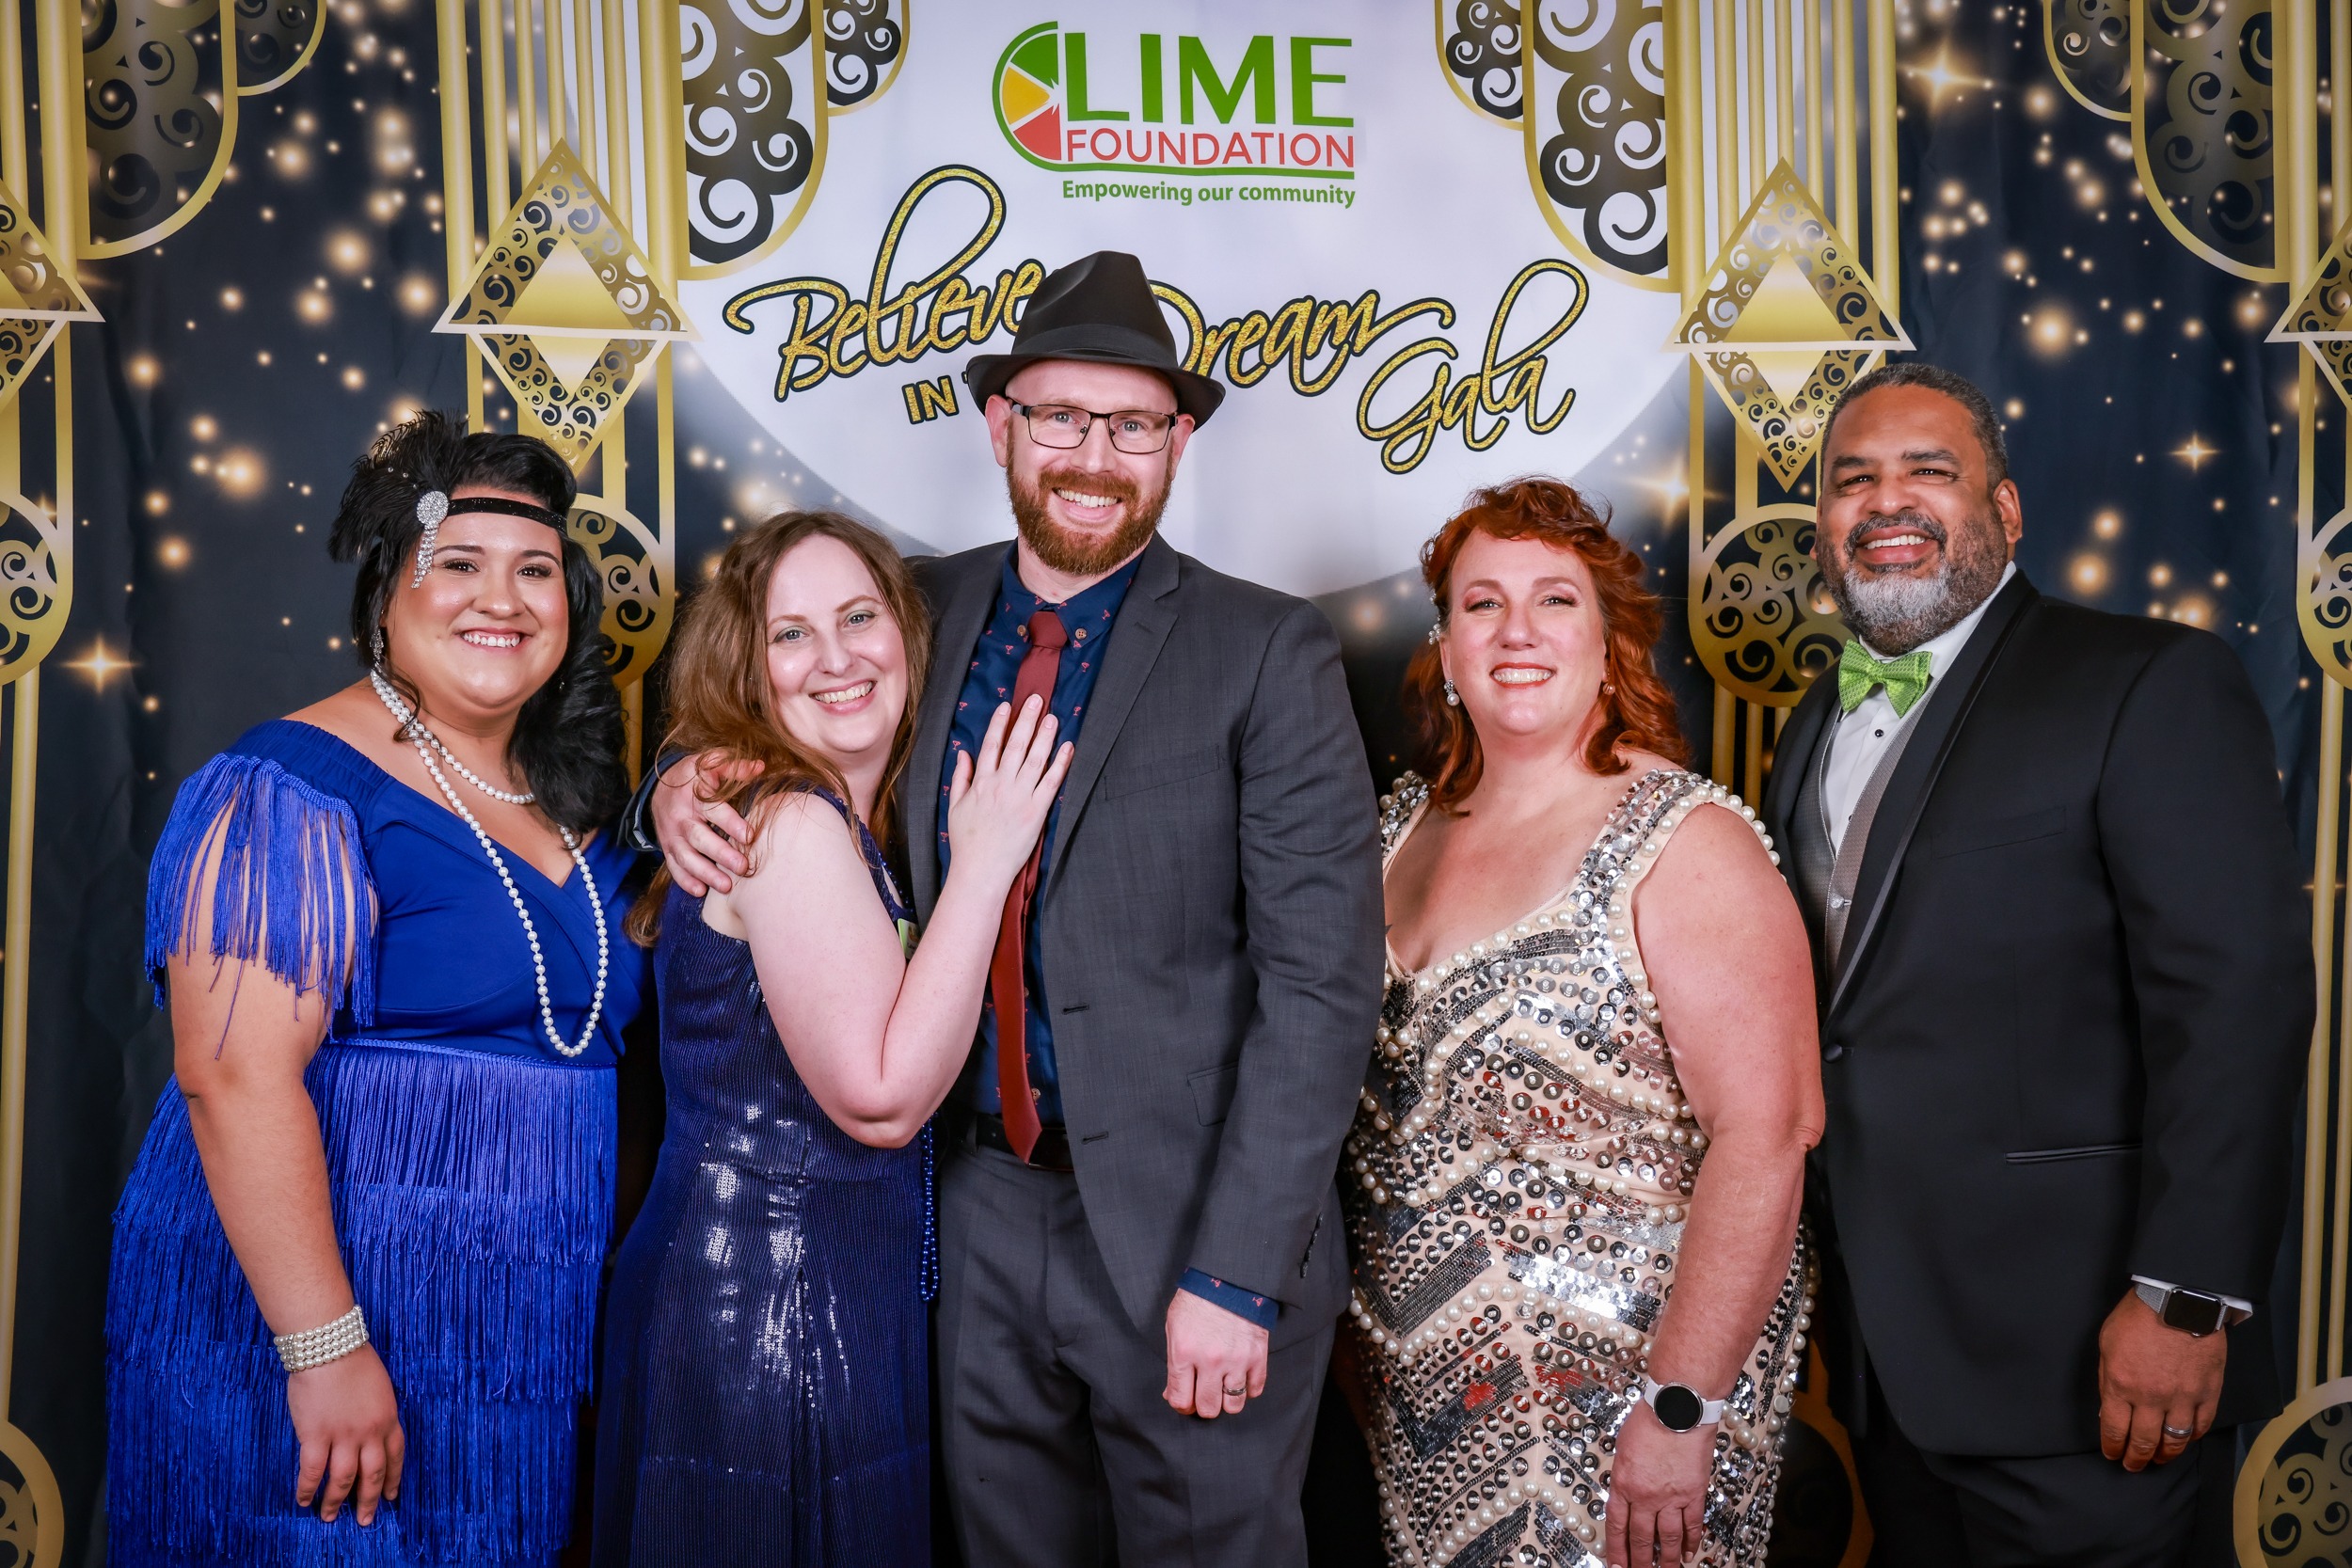 A group of people posing for a photo at a Sonoma County event hosted by The LIME Foundation.